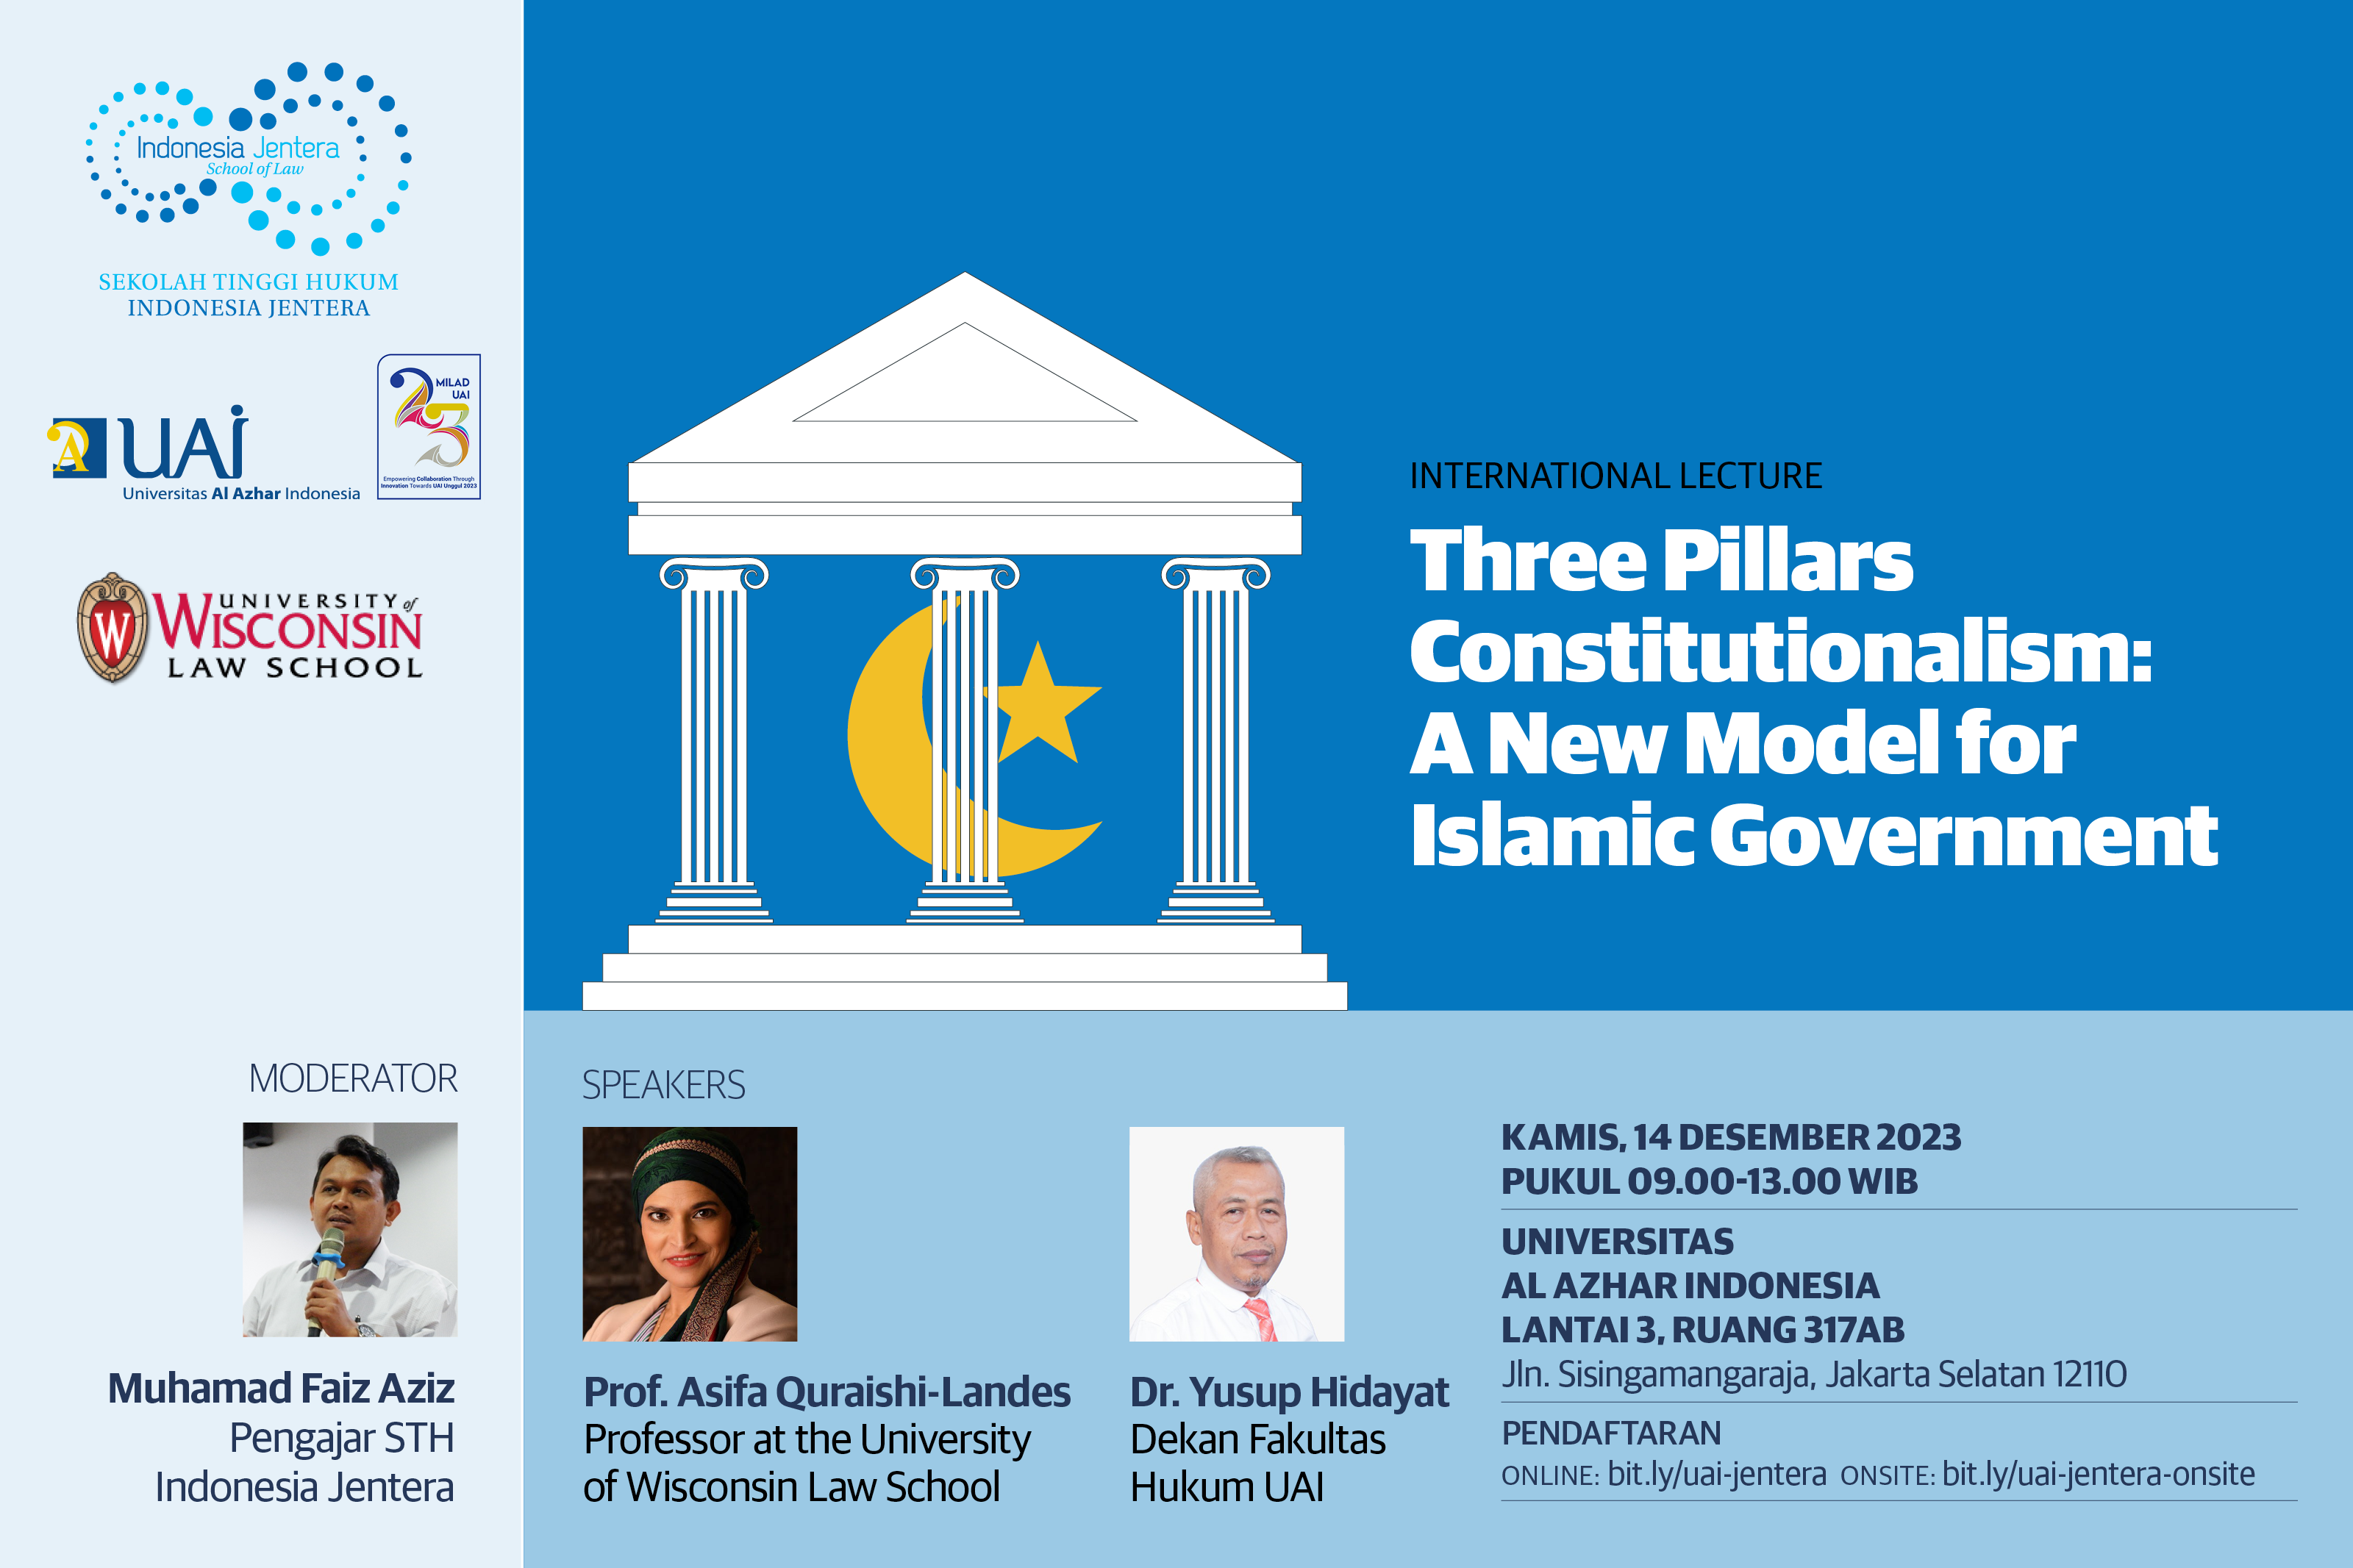 International Lecture Three Pillars Constitutionalism: A New Model for Islamic Government